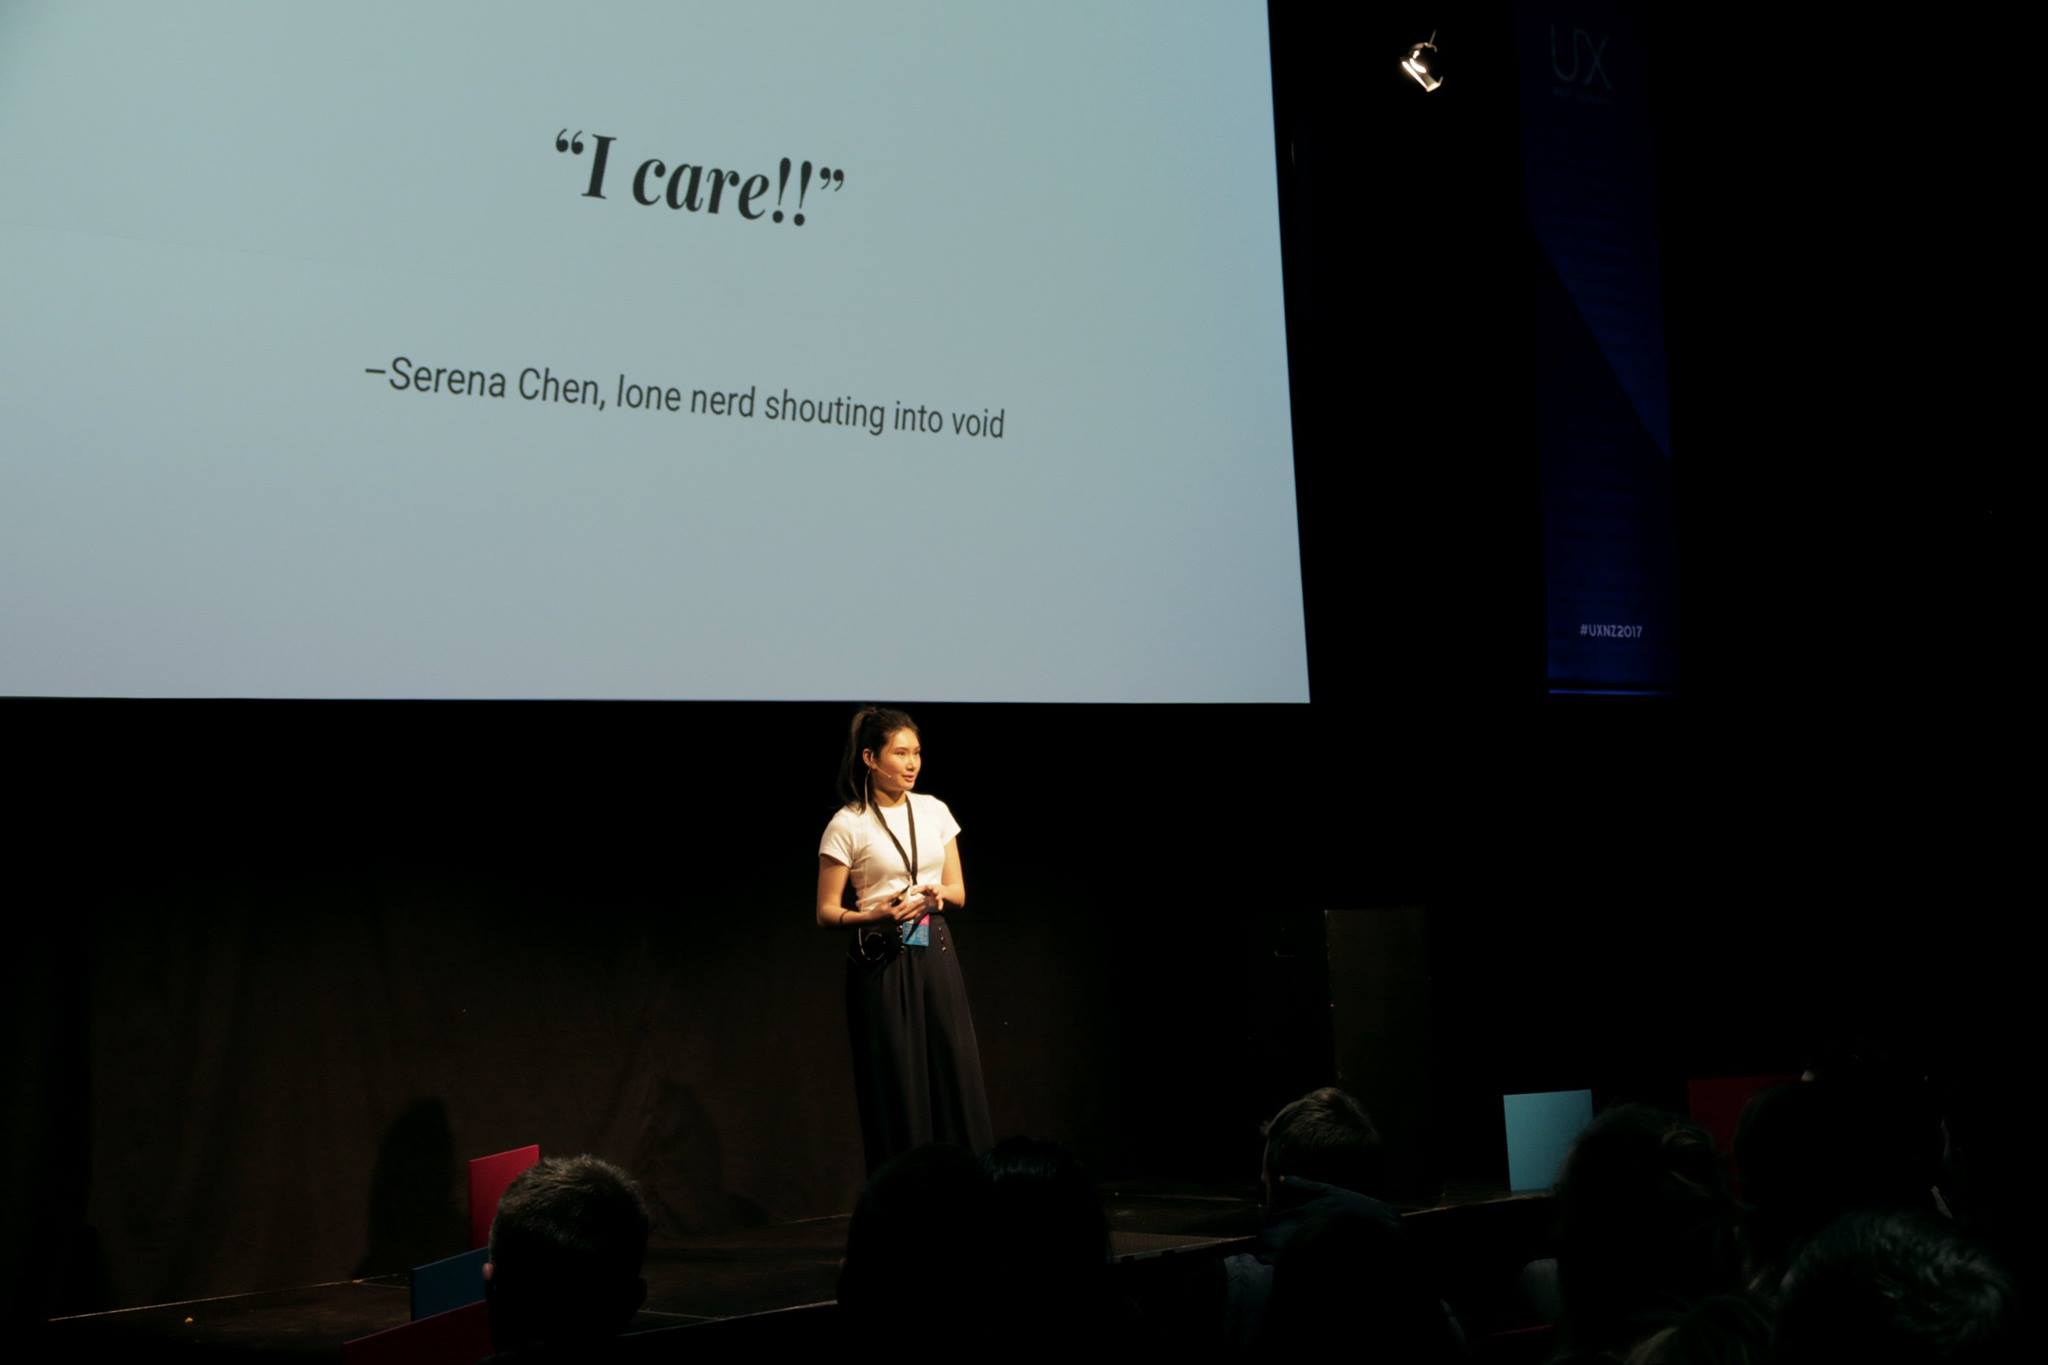 A photograph of me speaking at UXNZ in 2017